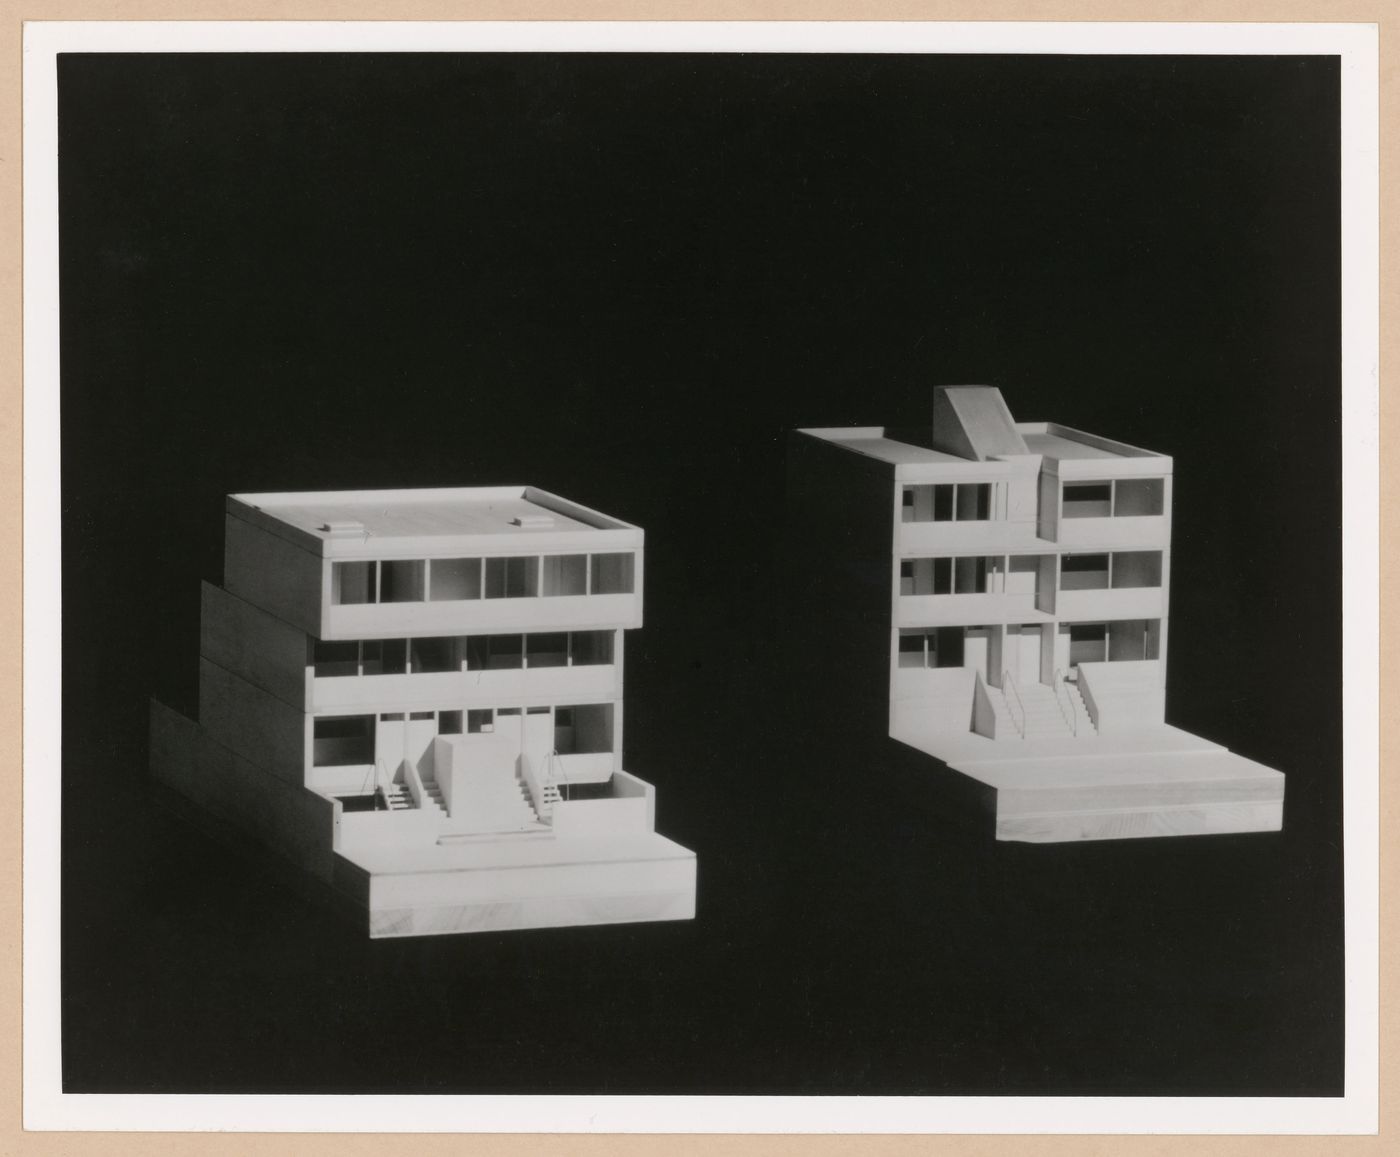 Photograph for the Low-Rise High-Density MoMA exhibitition